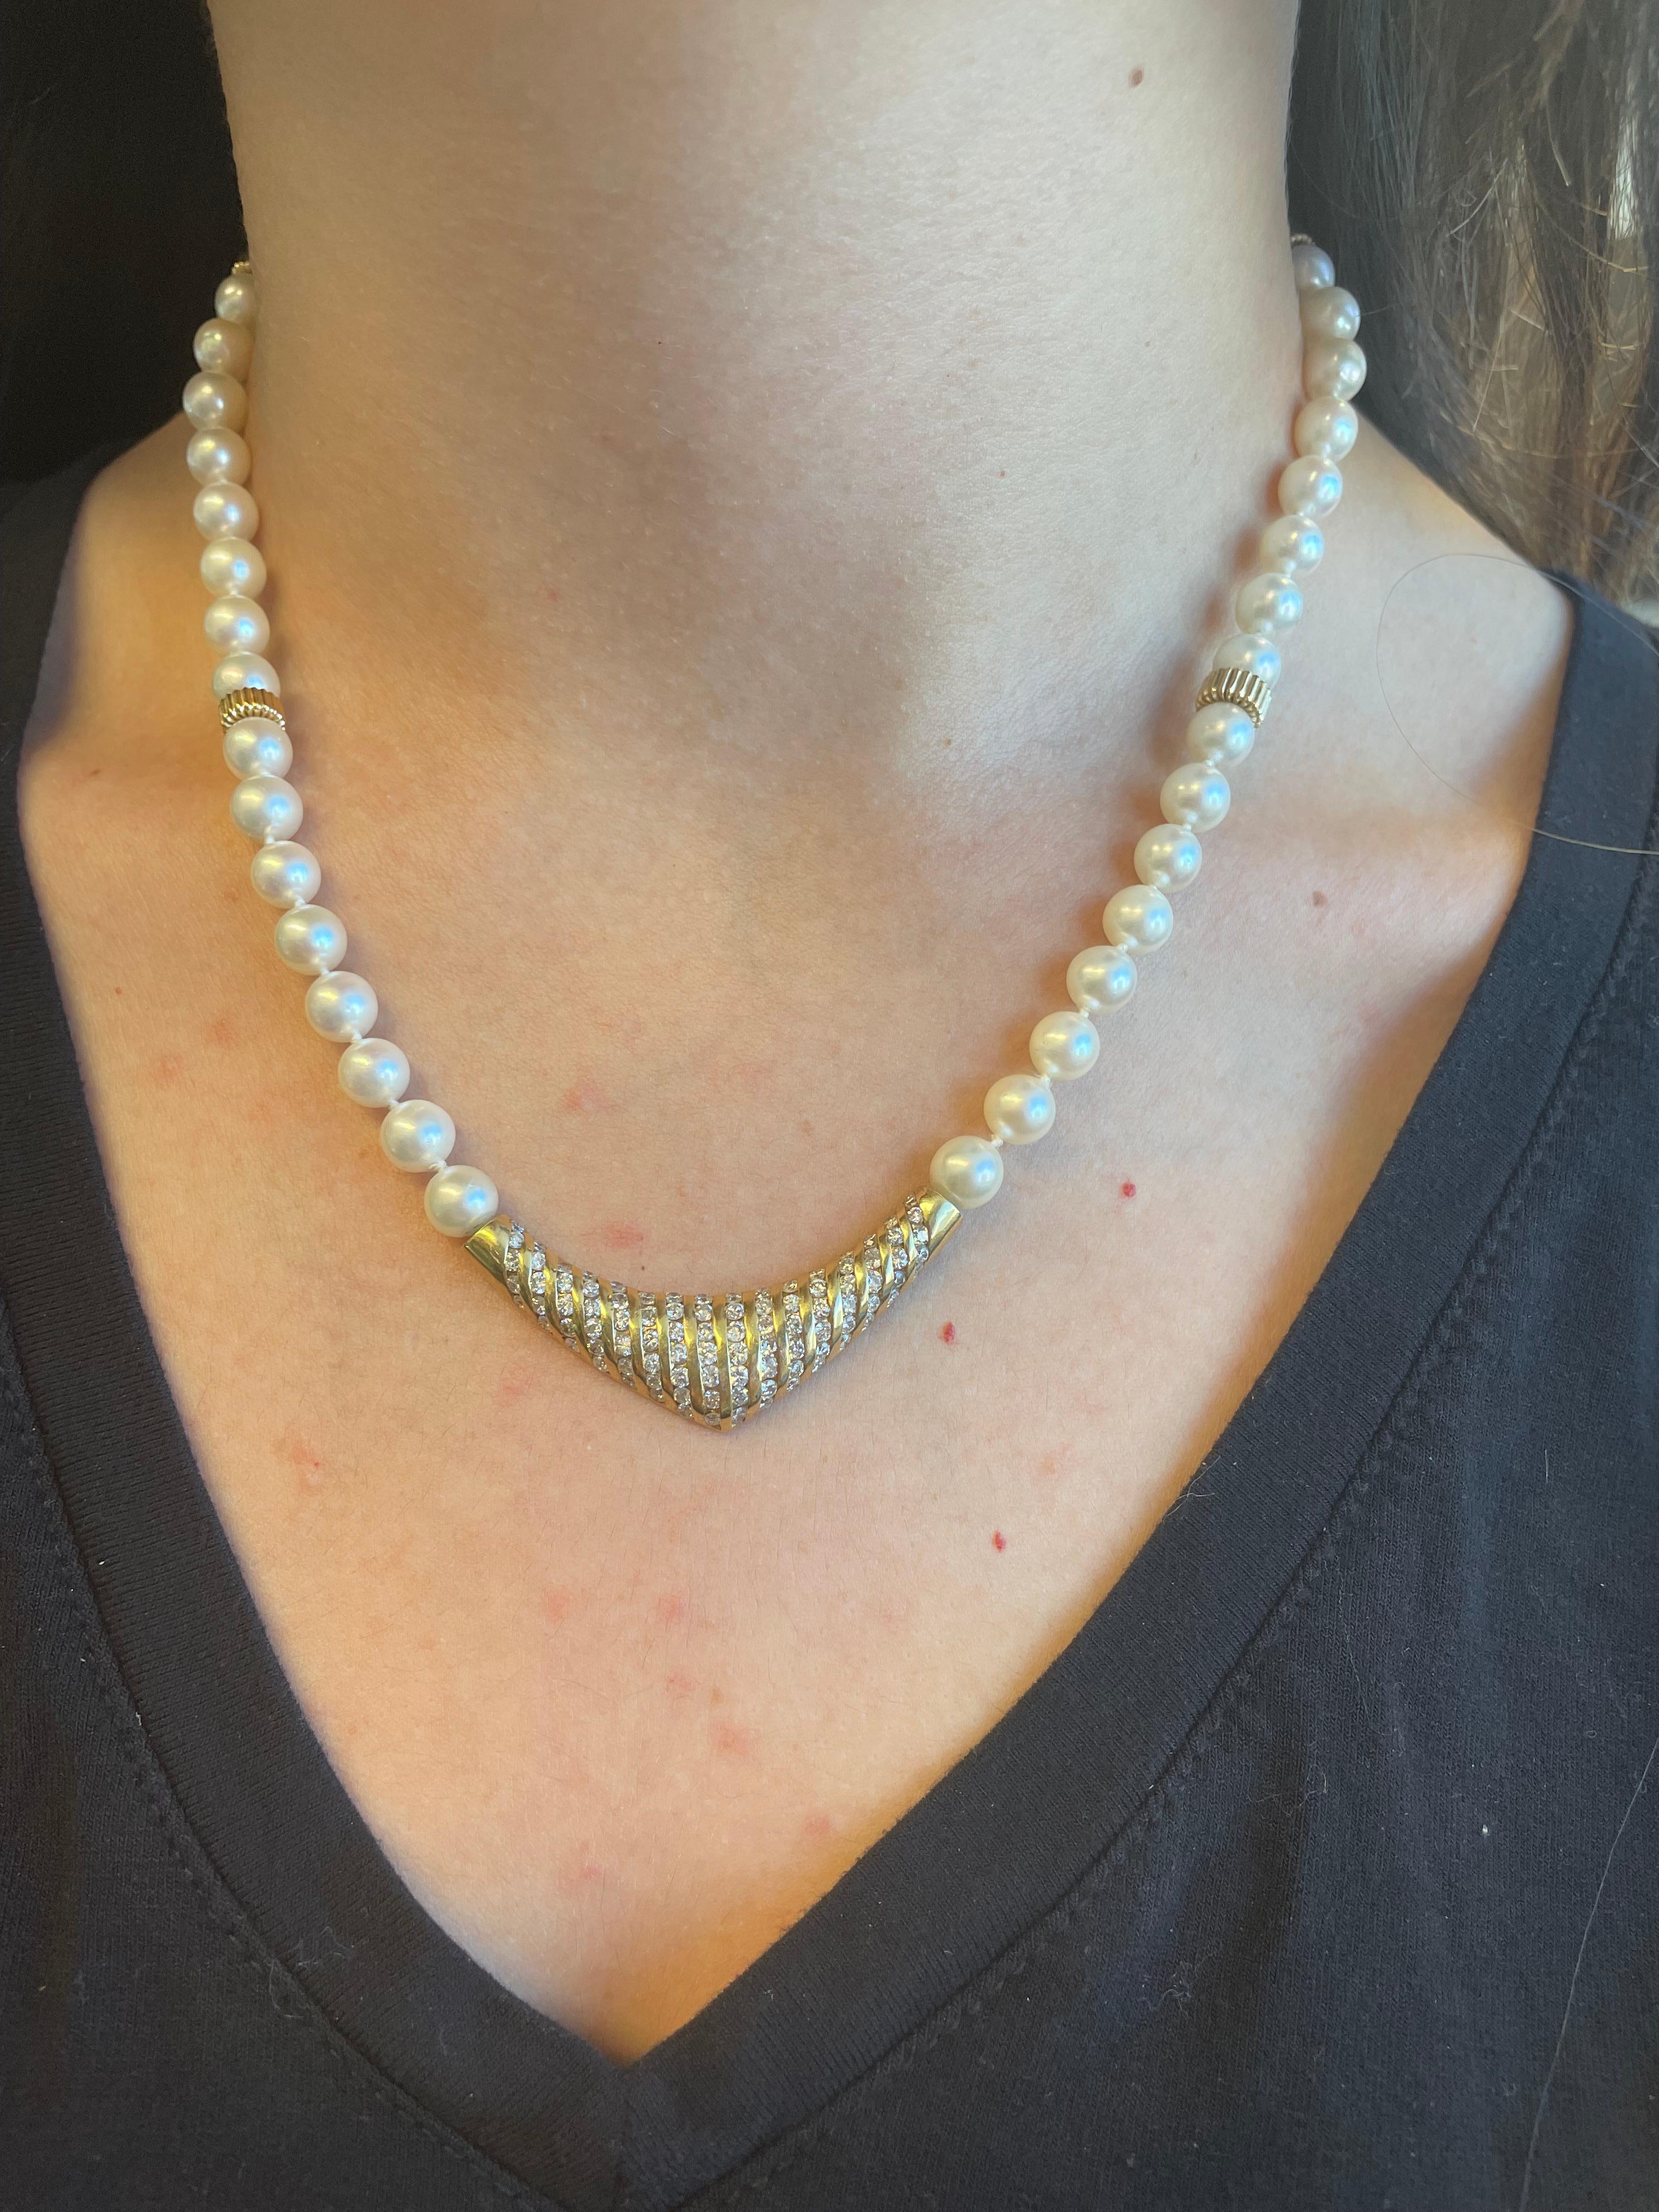 Diamonds and pearls strand necklace, yellow gold.
2.70 carats or round brilliant diamonds set in 14-karat yellow gold.
Accommodated with an up to date appraisal by a GIA G.G. upon request. Please contact us with any questions.

Item Number 
N230